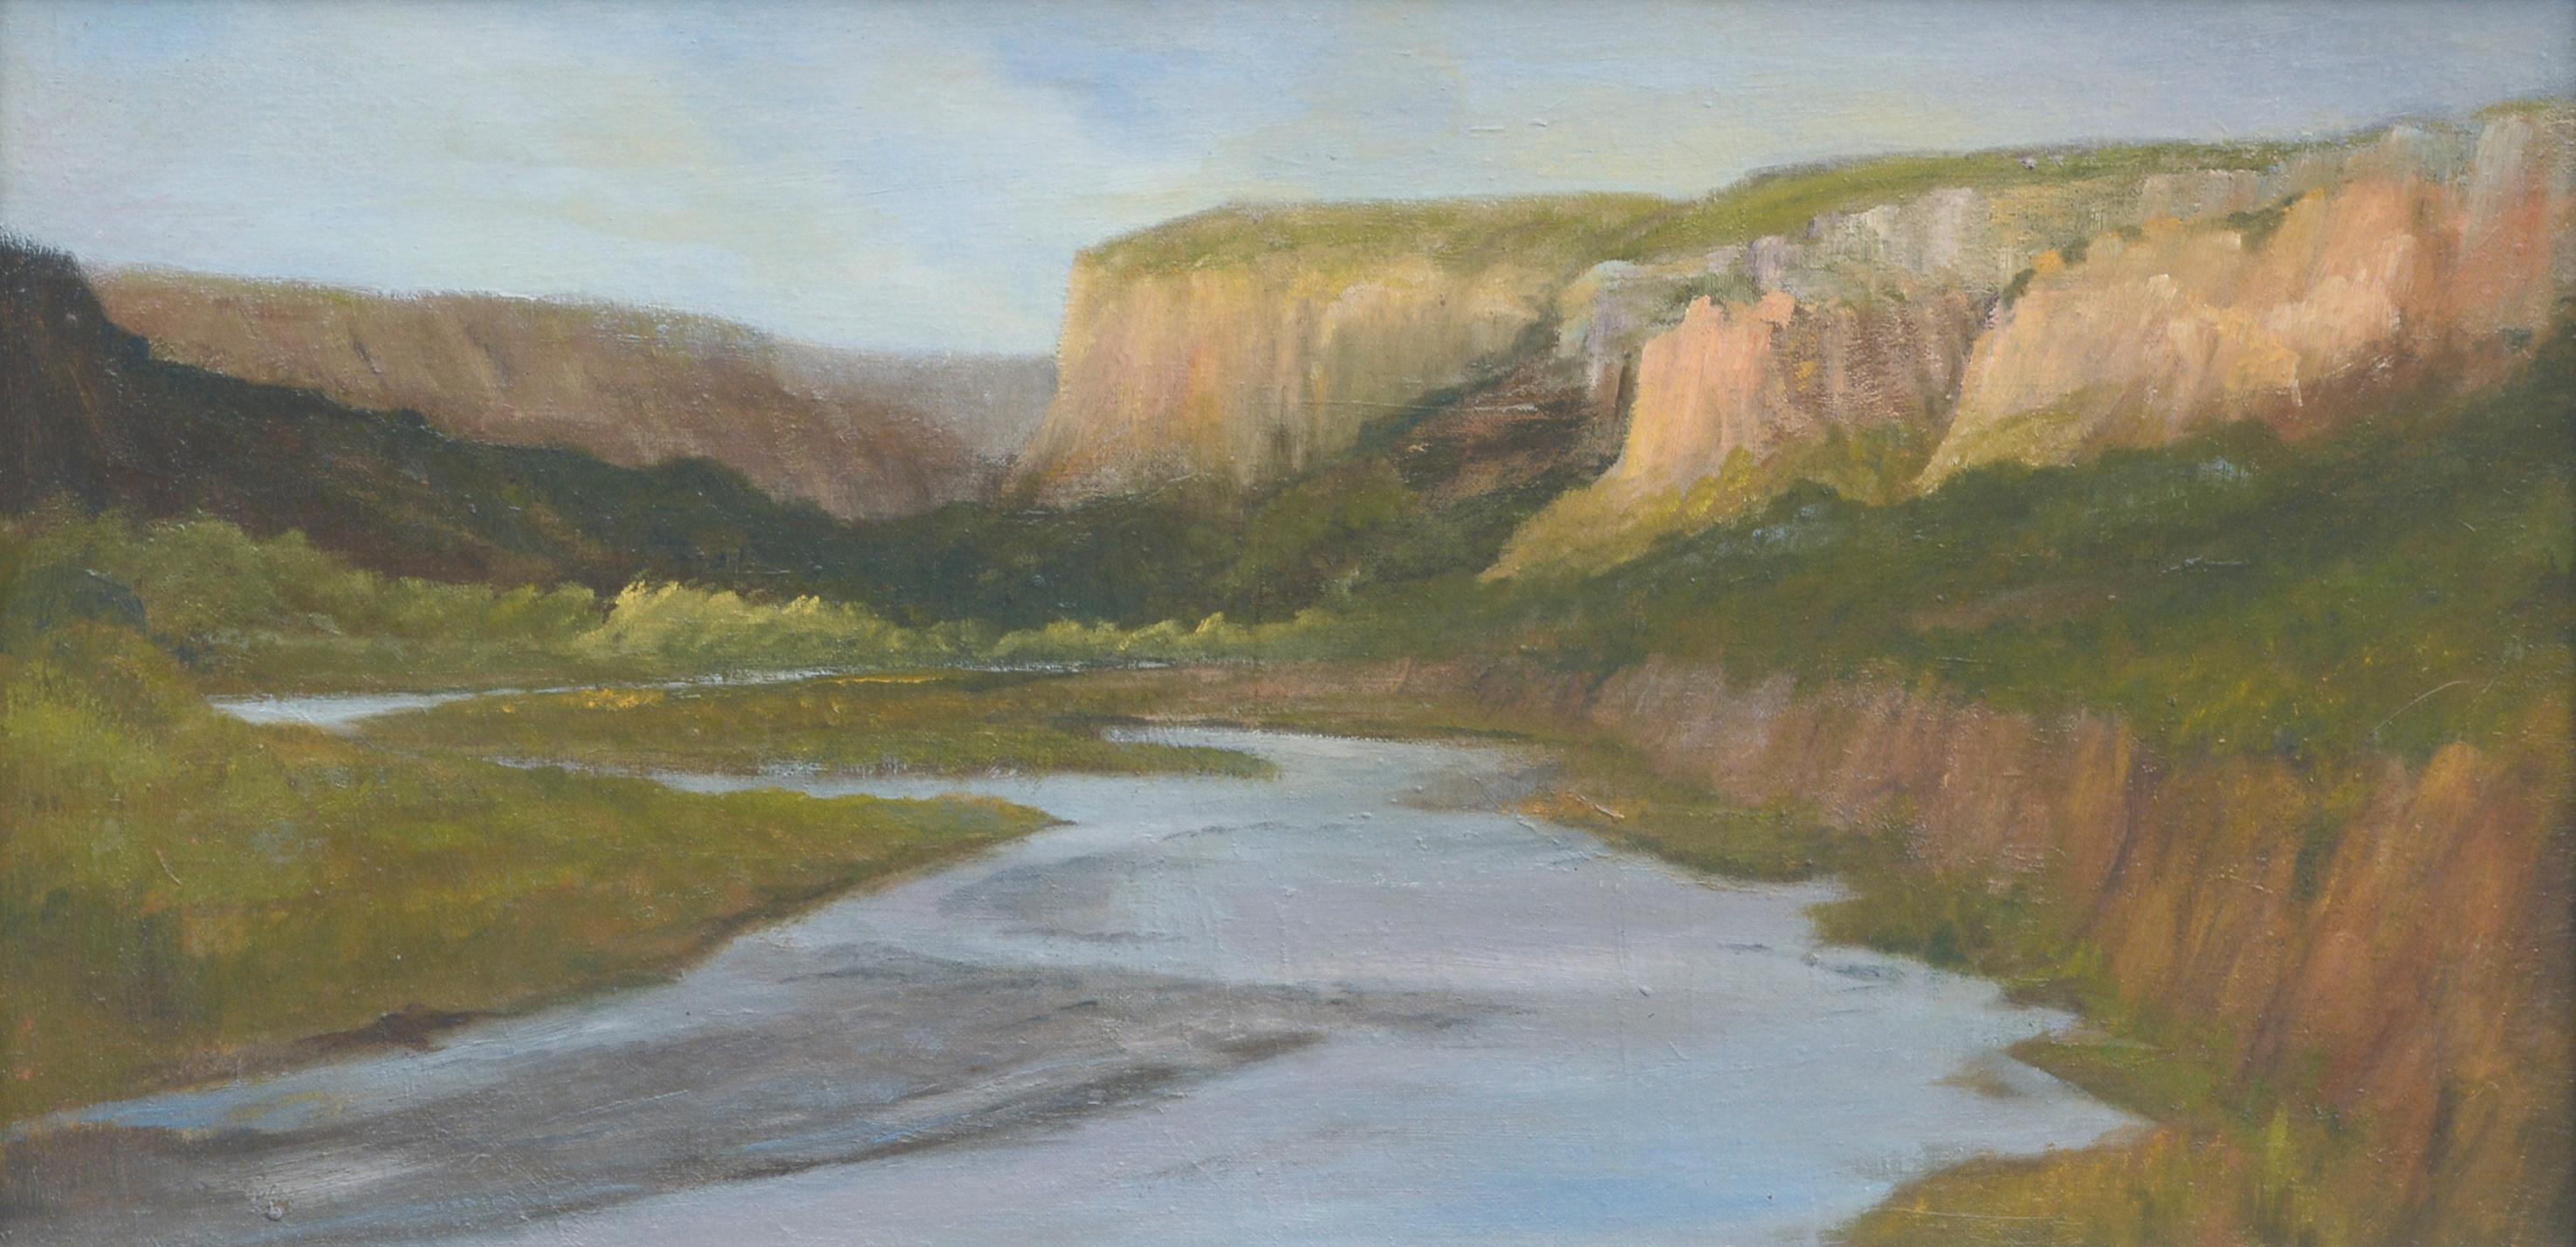 The River Mouth - Landscape - Painting by Kenneth Lucas